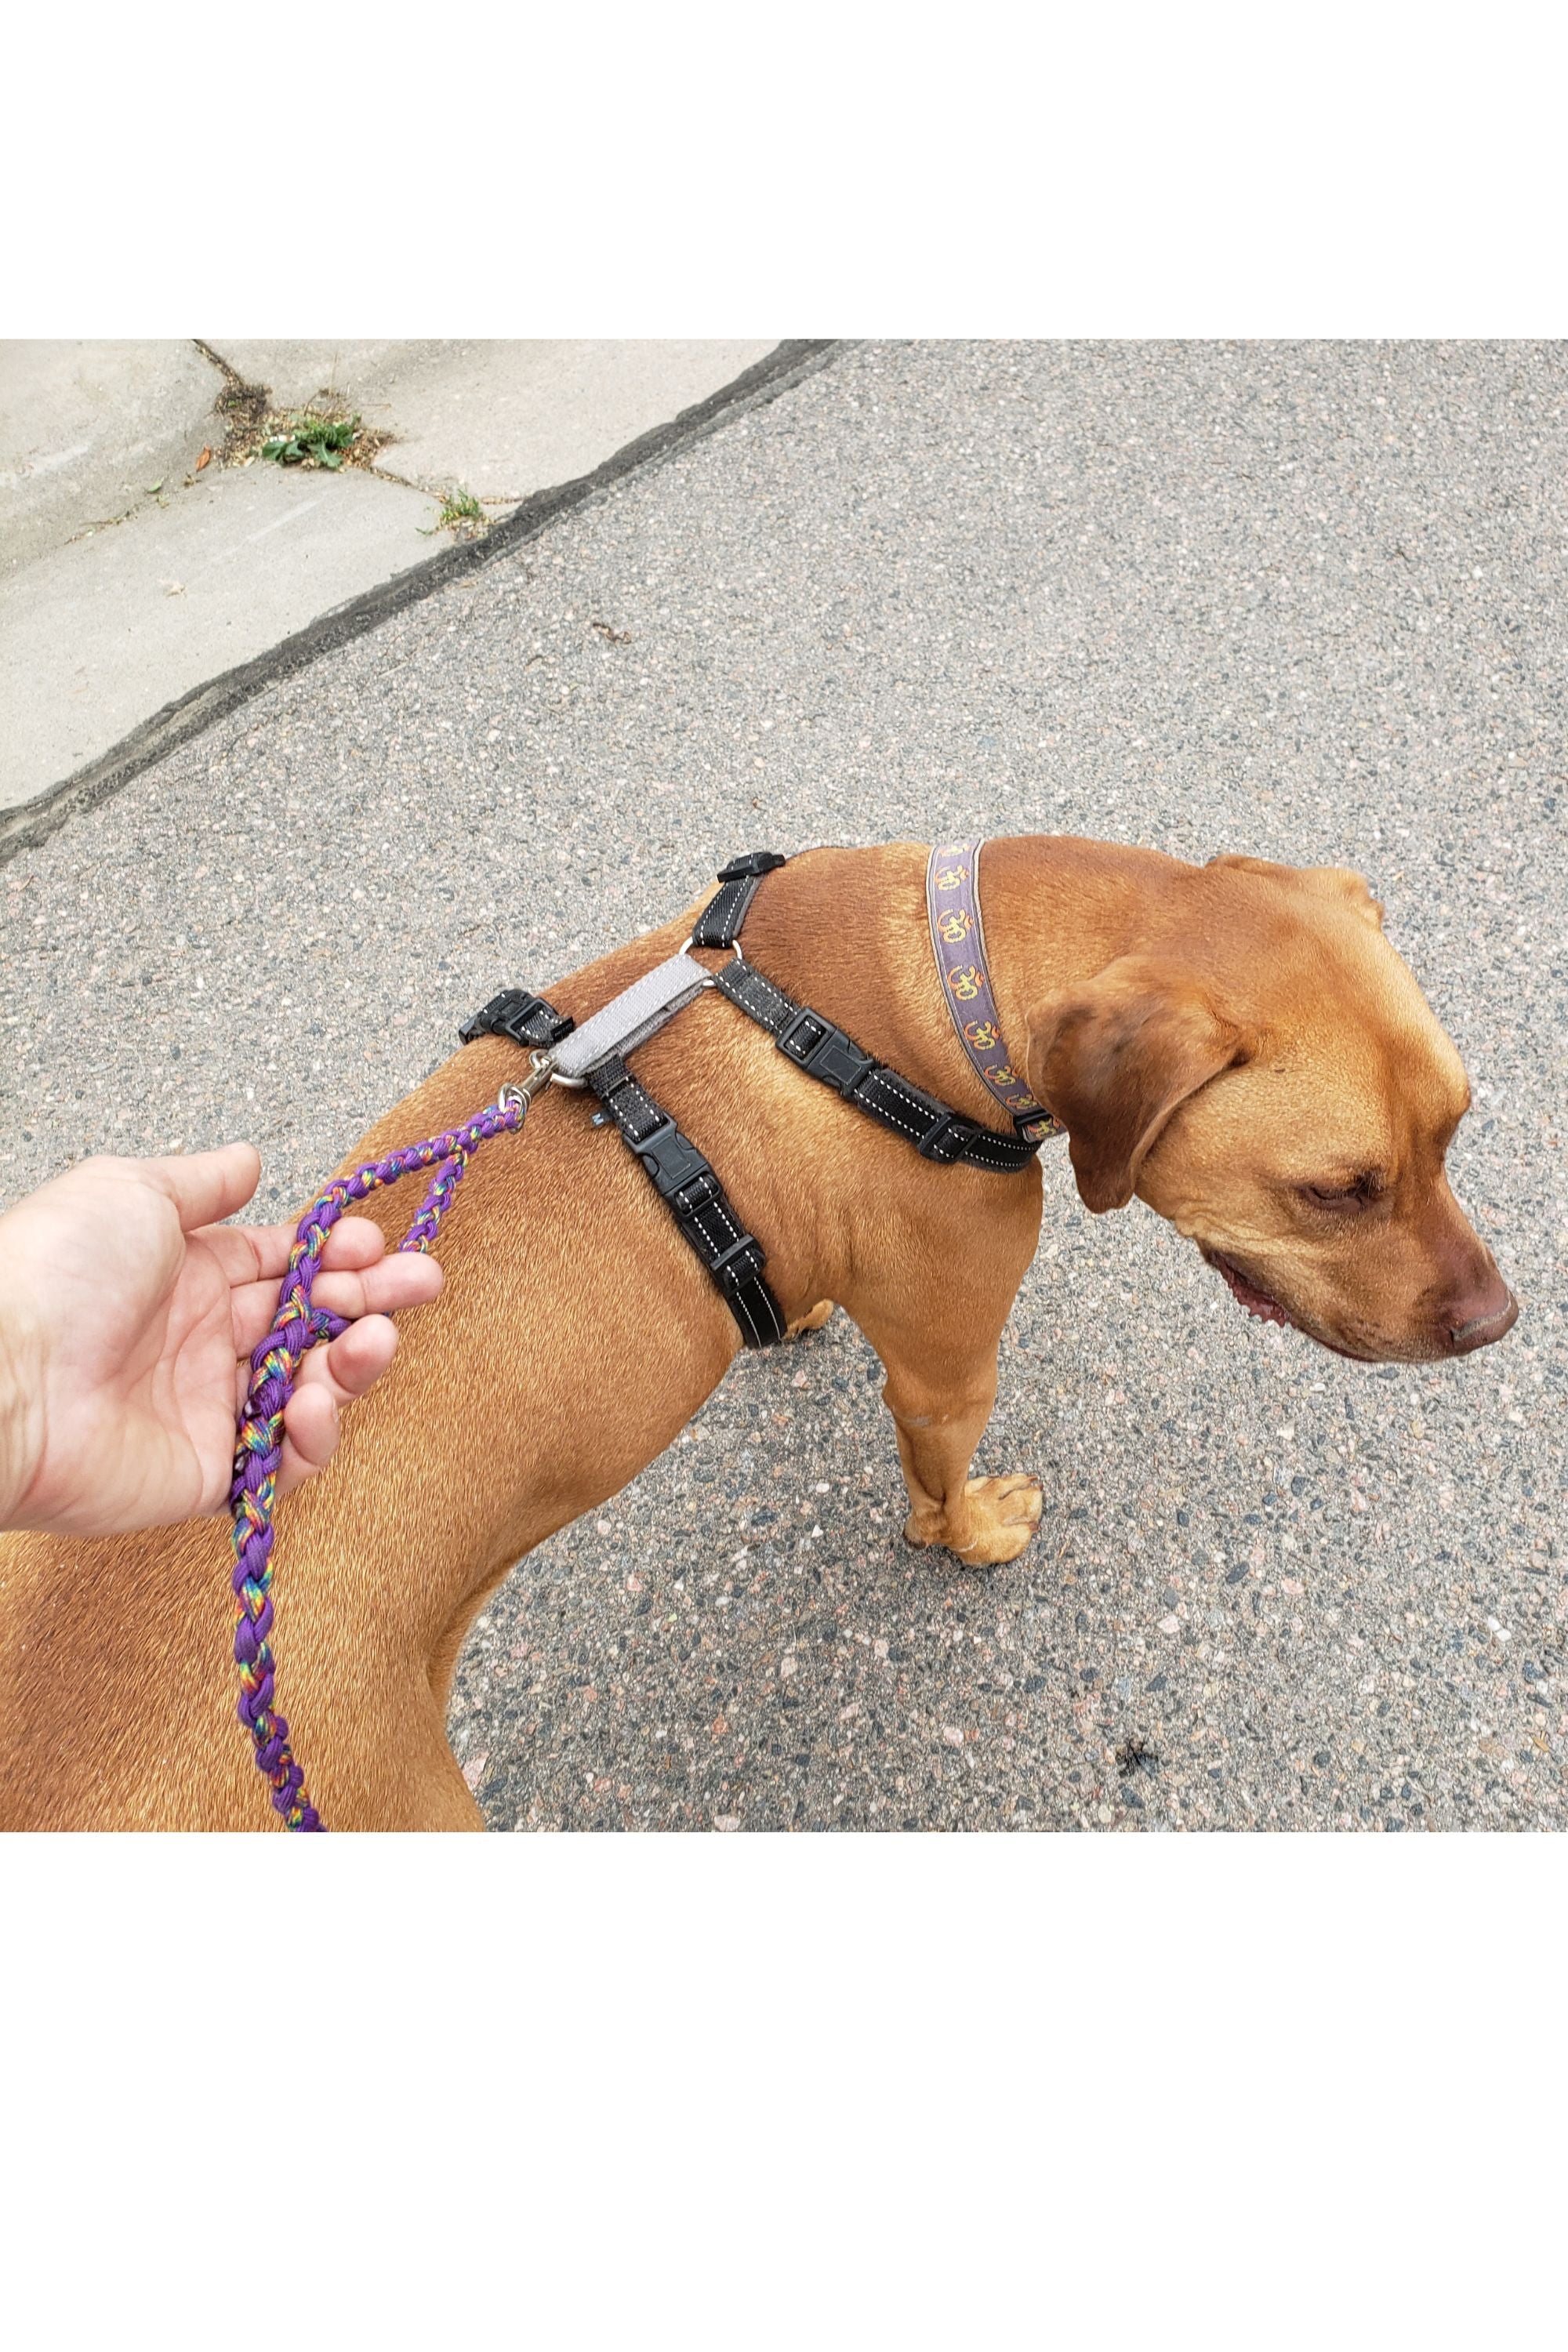 Apricot colored dog in a harness, showing the purple leash clipped onto the back connection point of the harness and the dog walkers hand is holding the loop at the dog end of the leash.